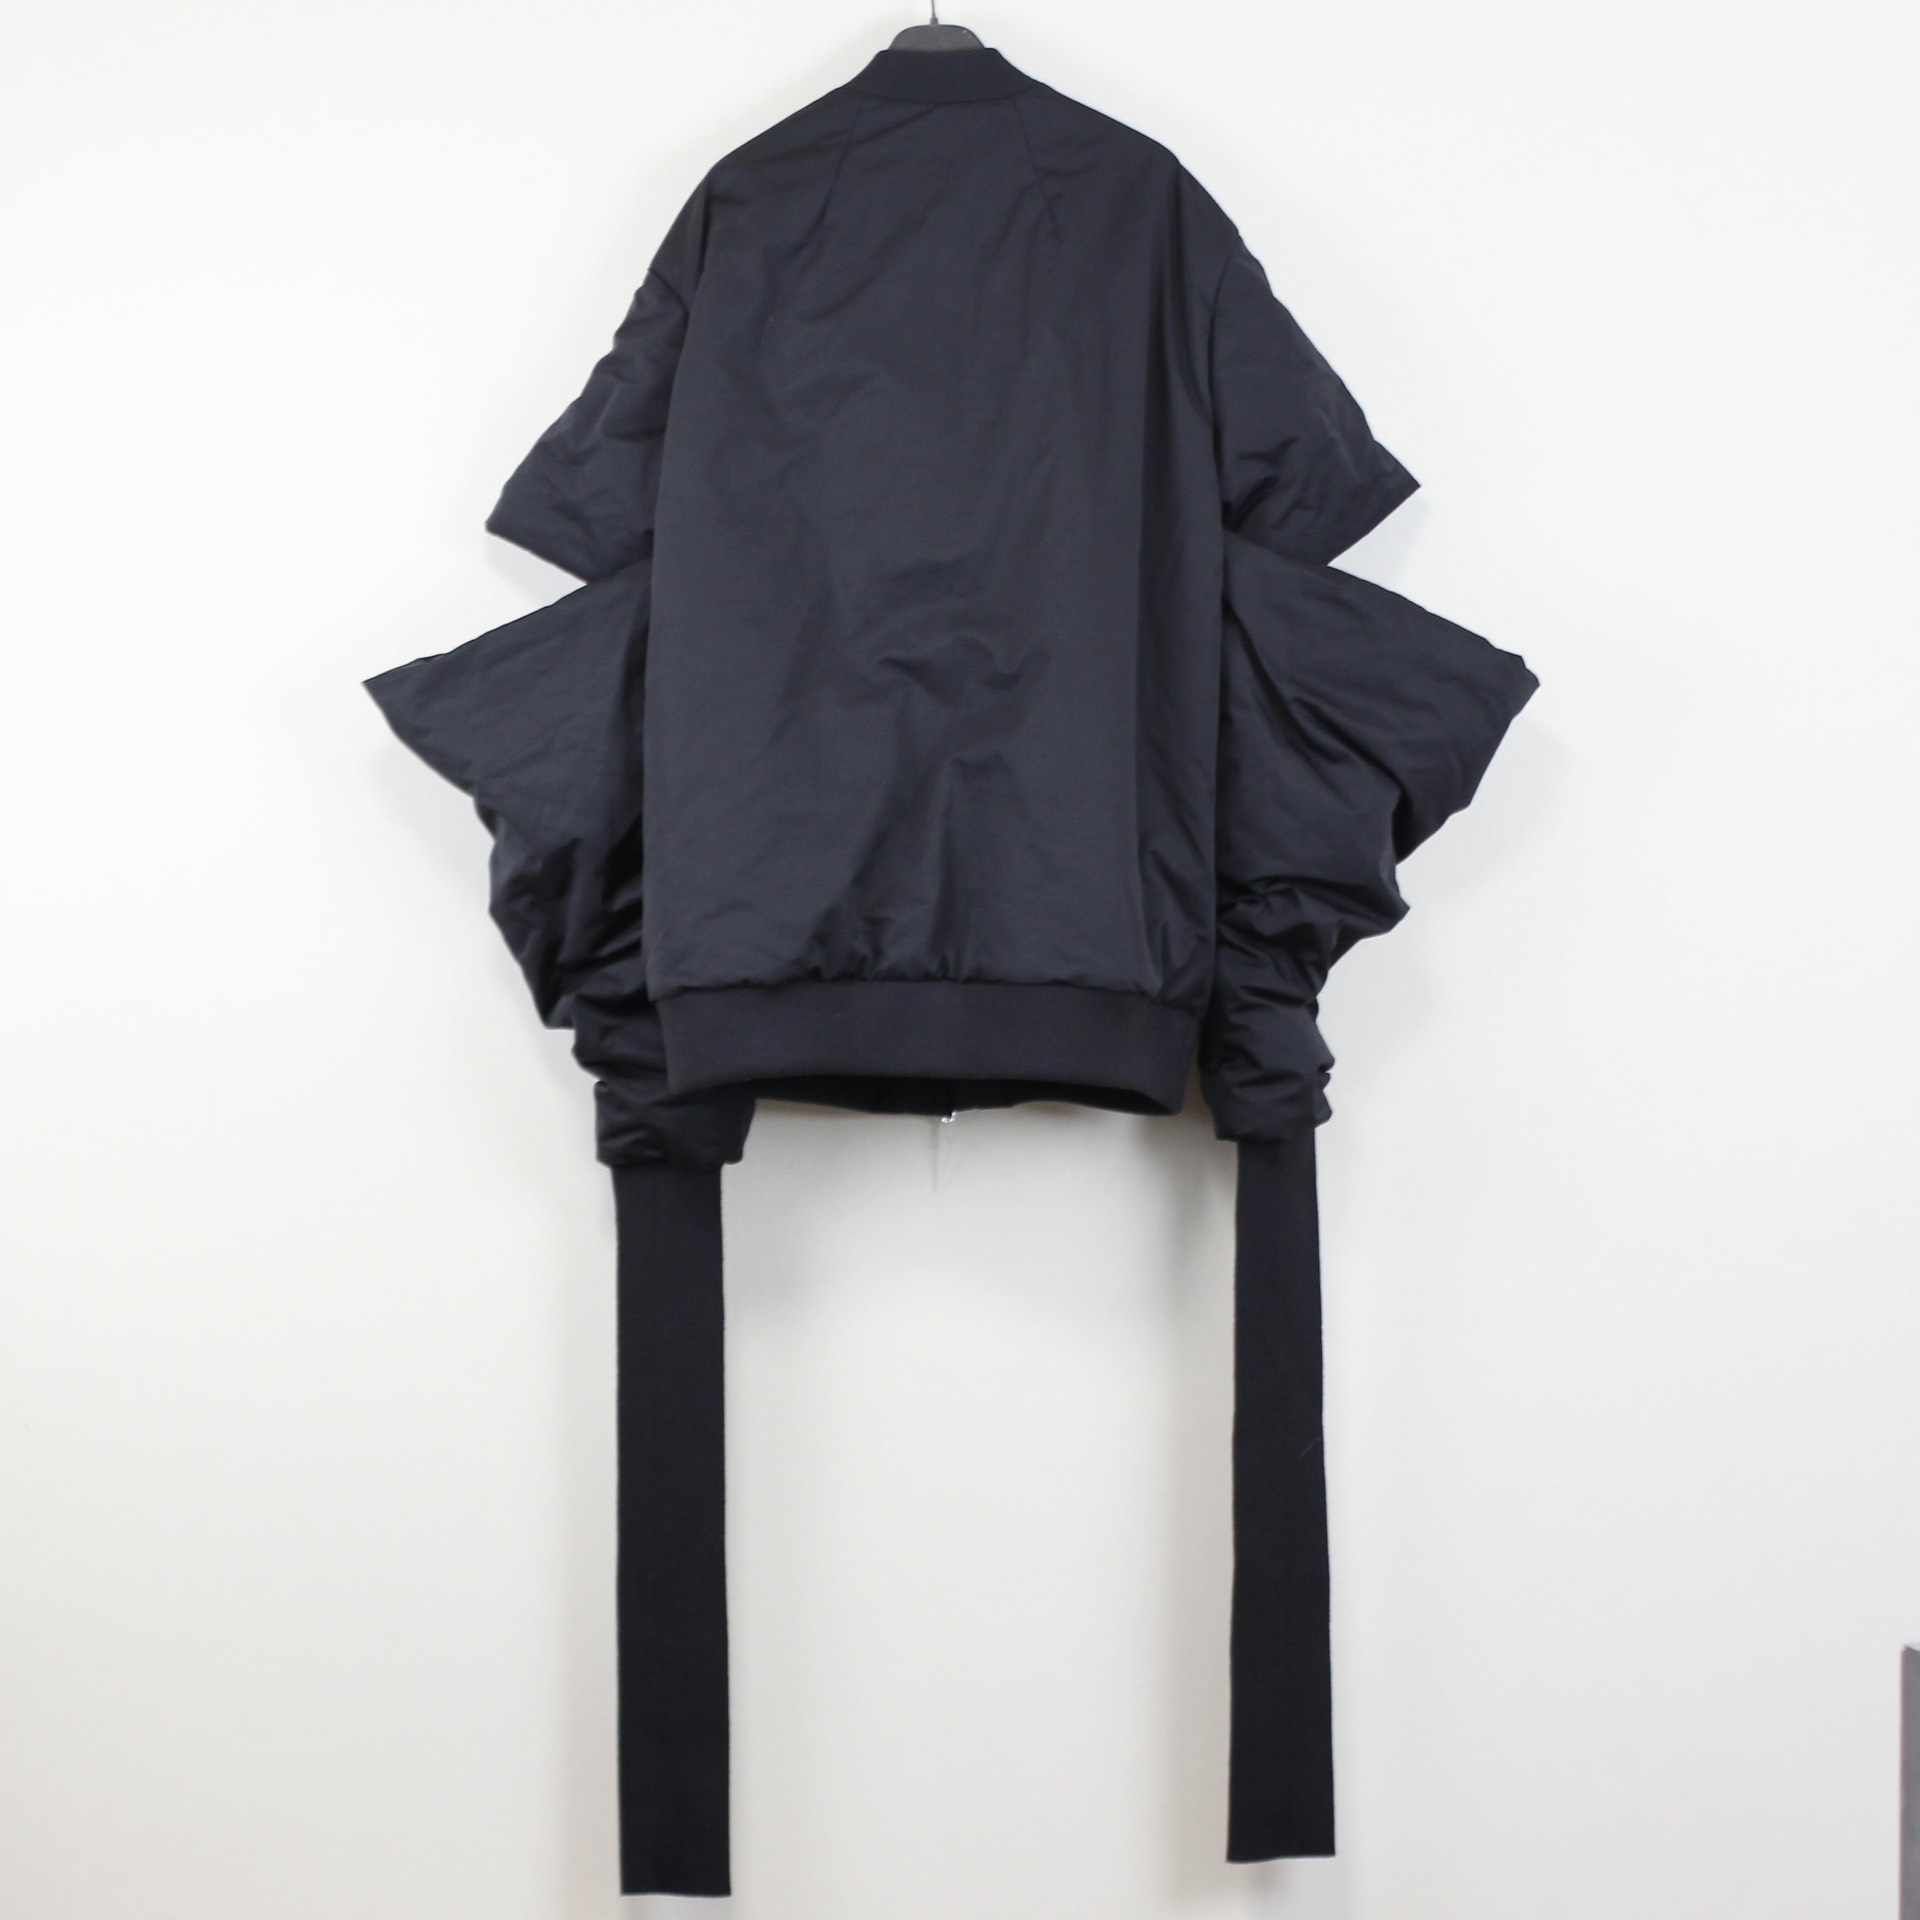 Rick owens bomber jacket with extra long gauntlet sleeves - 2